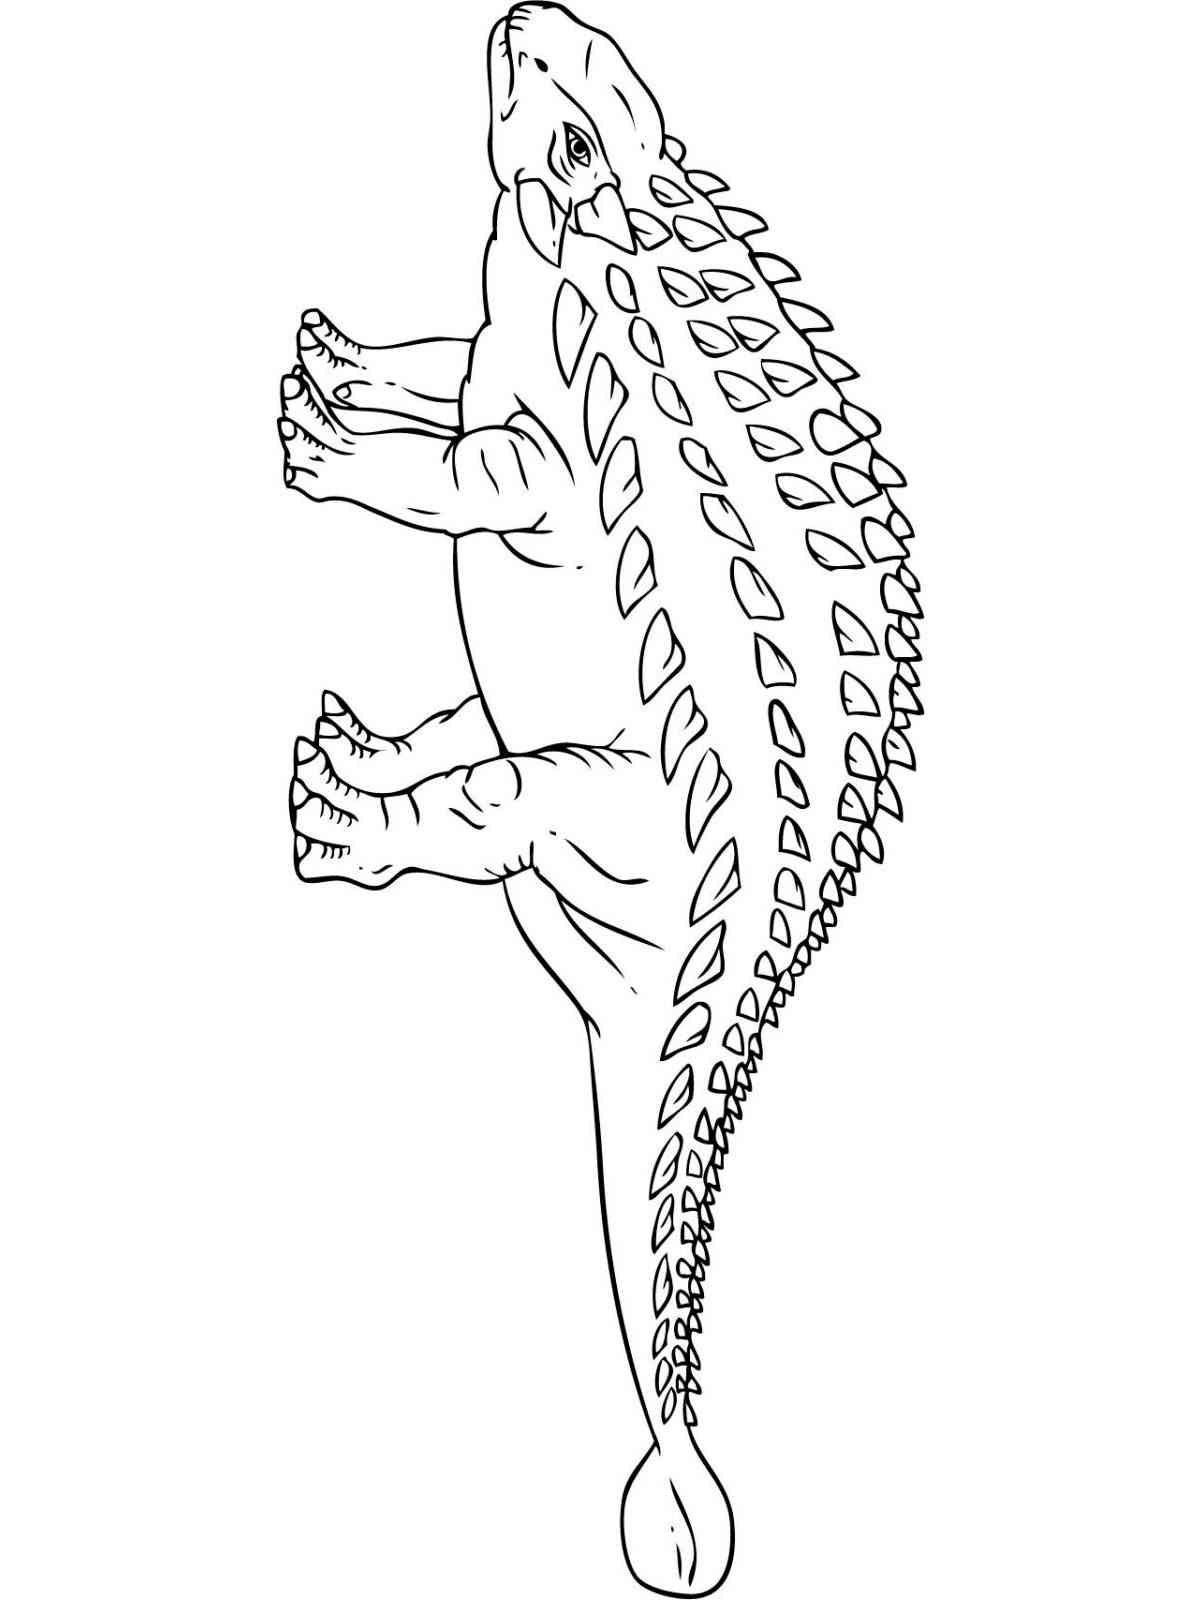 Tarchia coloring page